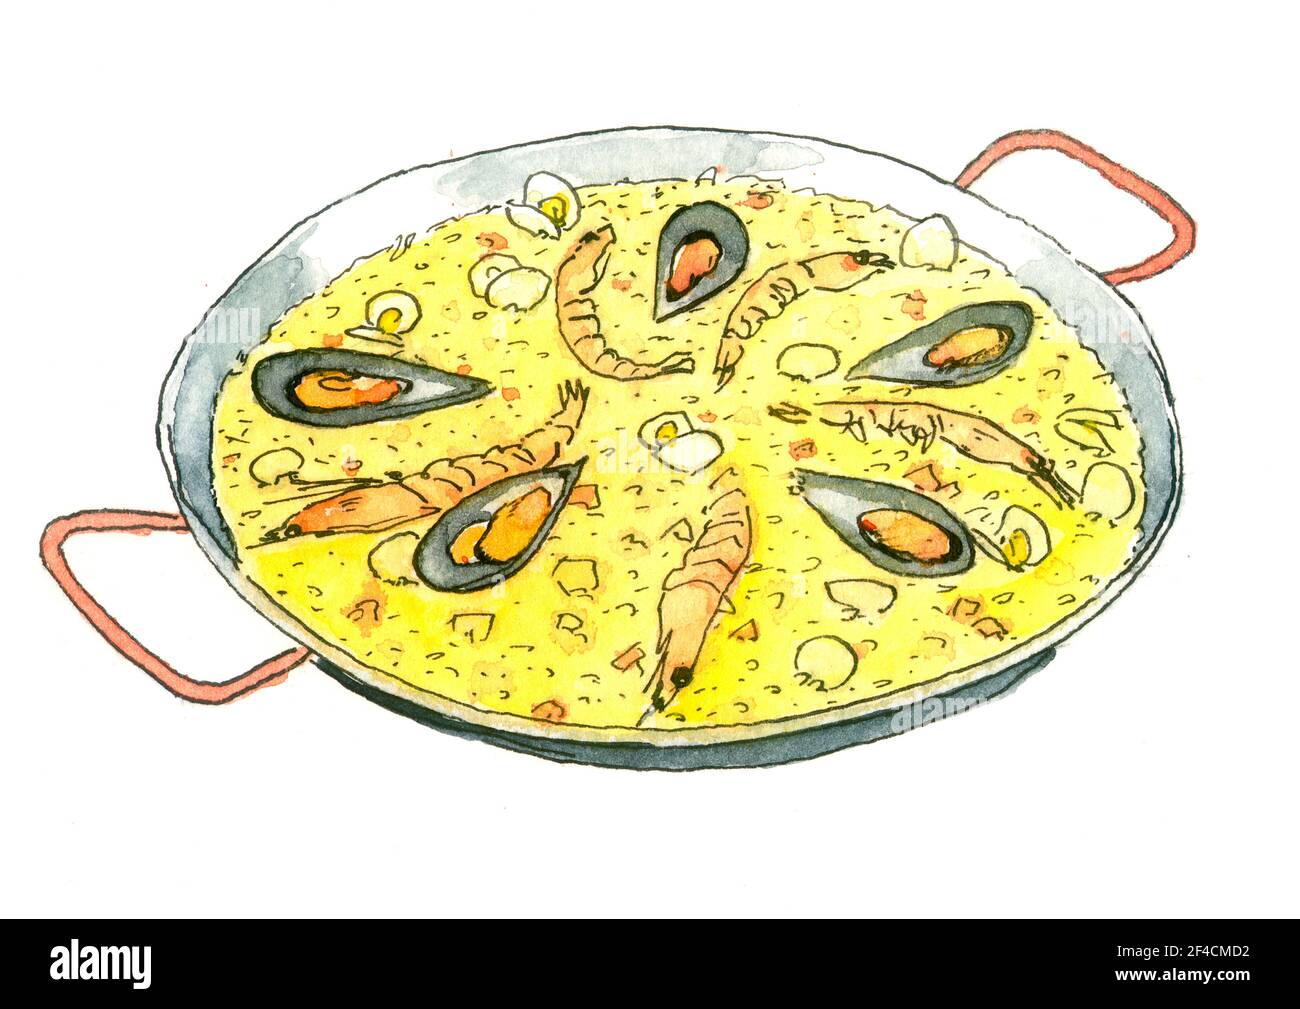 Paella illustration. Spanish rice, paella with seafood. Watercolor drawing. Stock Photo